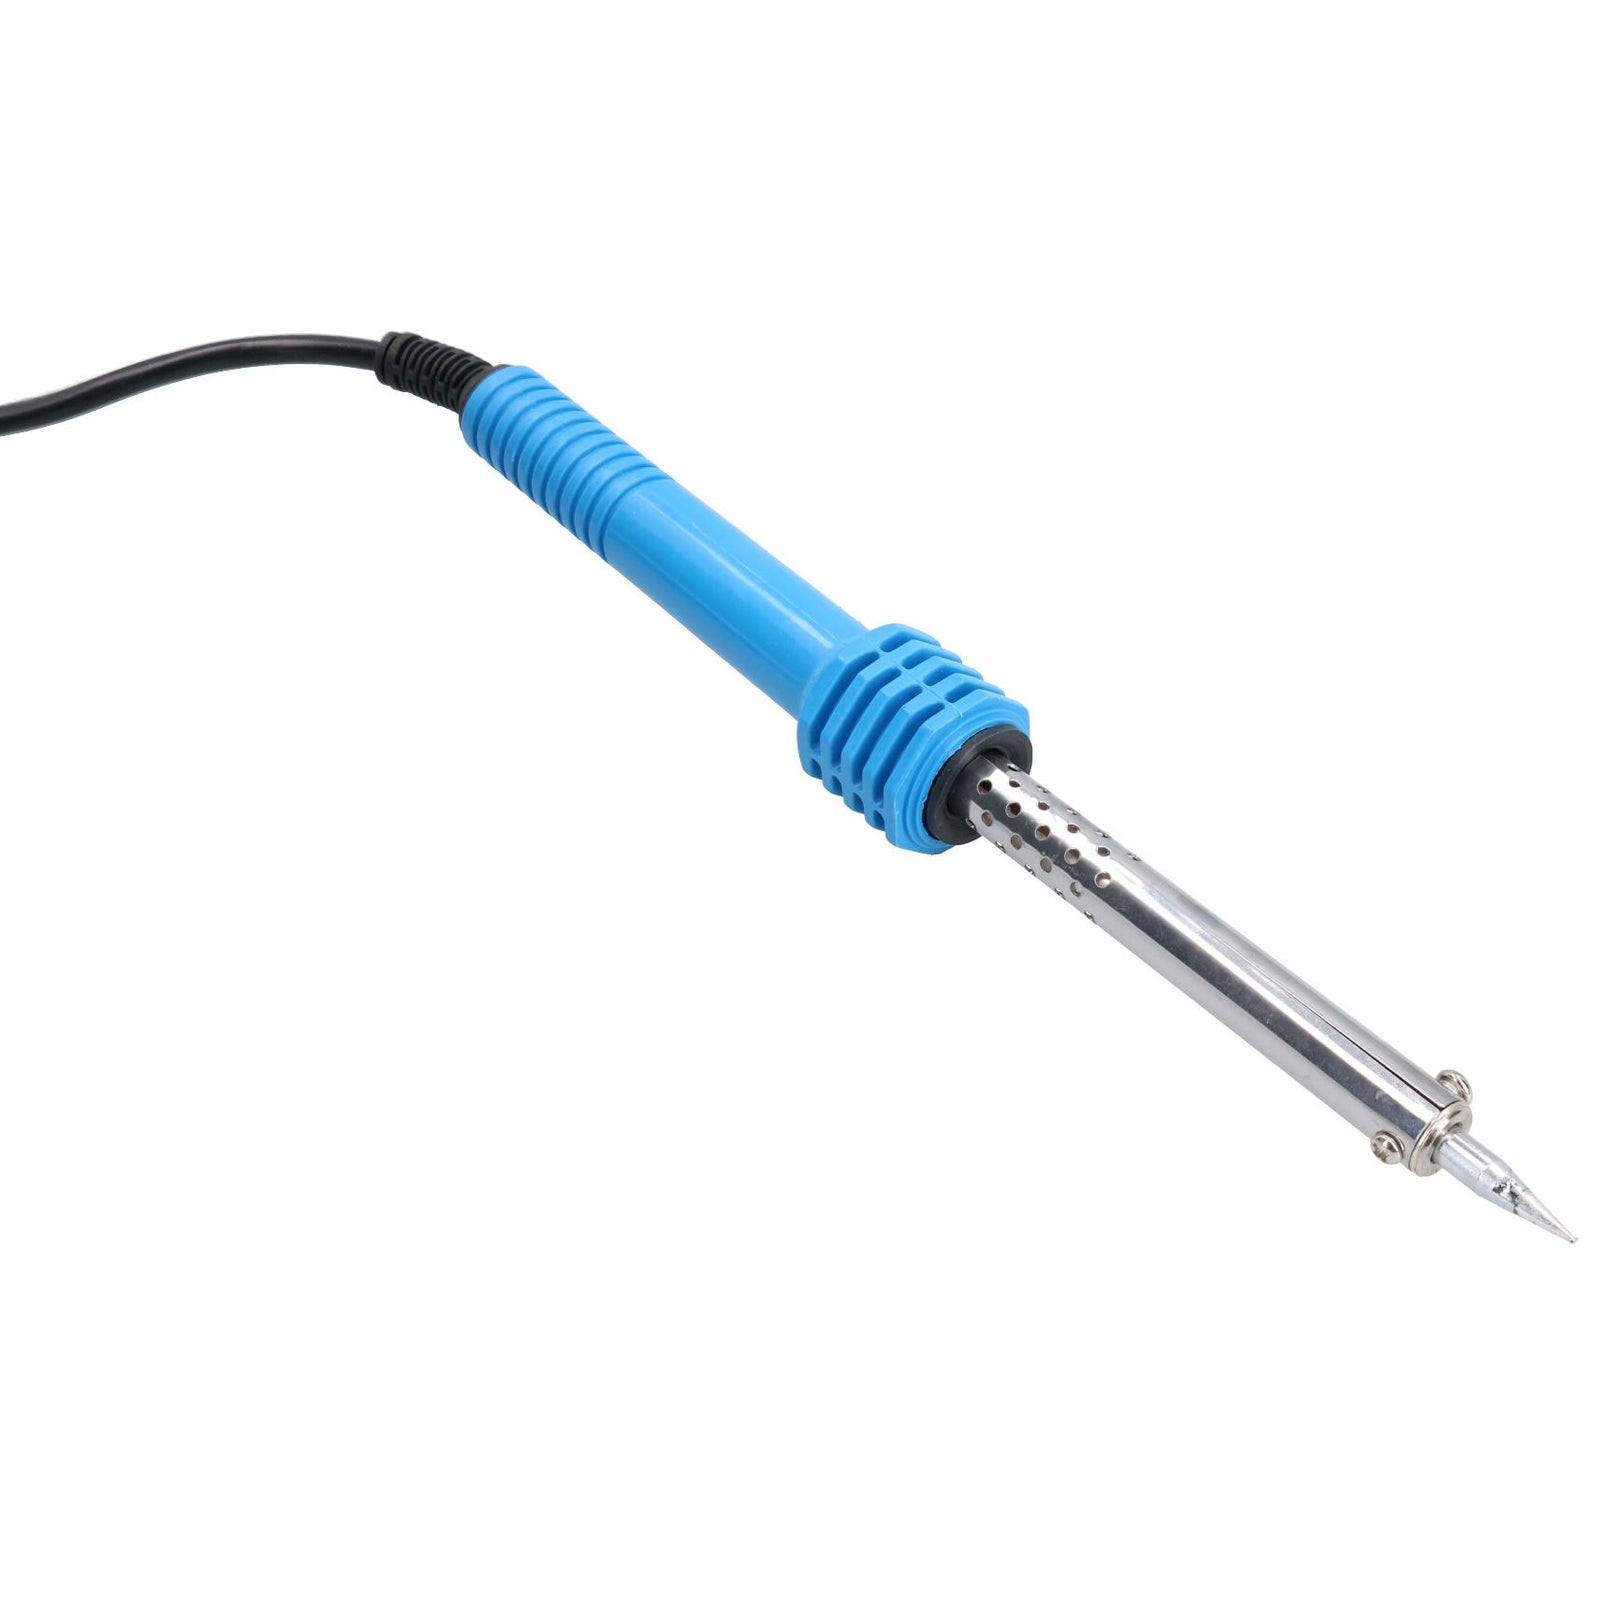 60W Soldering Iron Electric Solder 230v With Copper Tip By BERGEN AT307